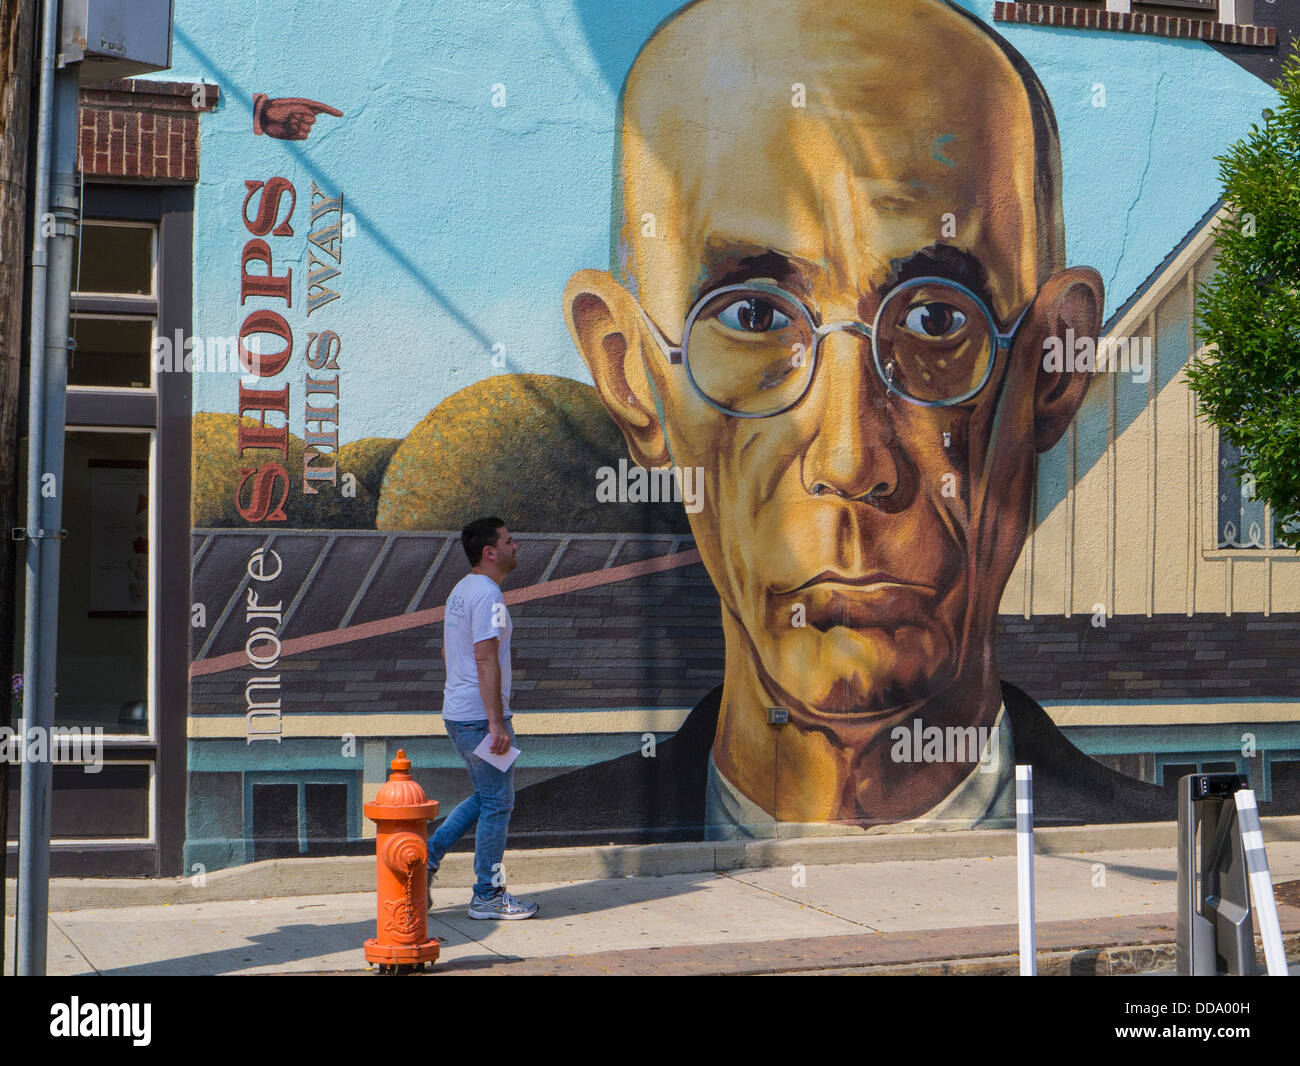 Grant Woods American Gothic mural painted on building in Short North area of Columbus Ohio United States Stock Photo